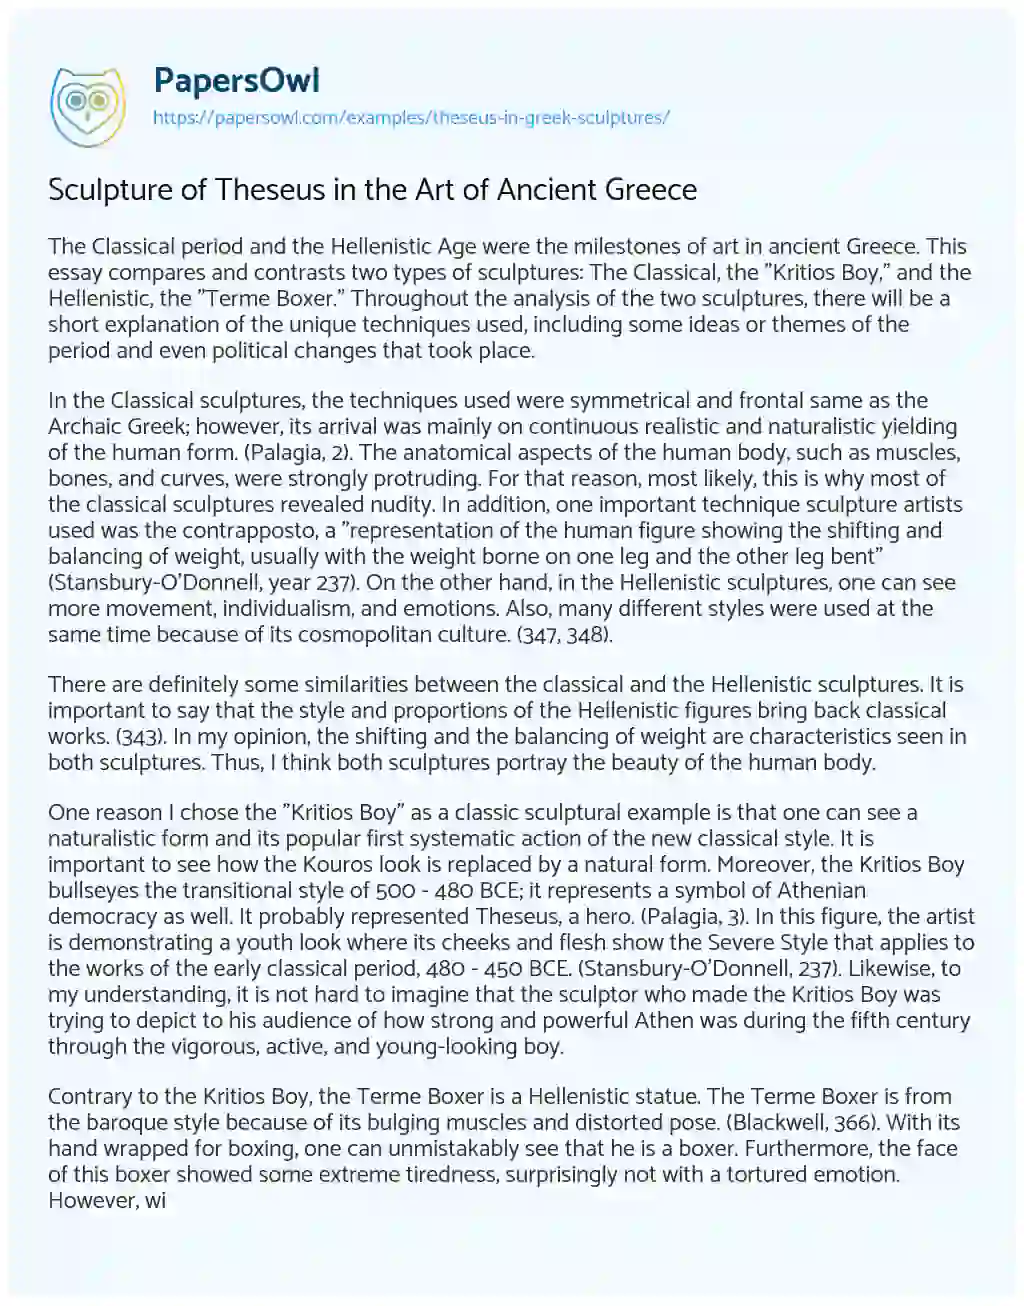 Essay on Sculpture of Theseus in the Art of Ancient Greece